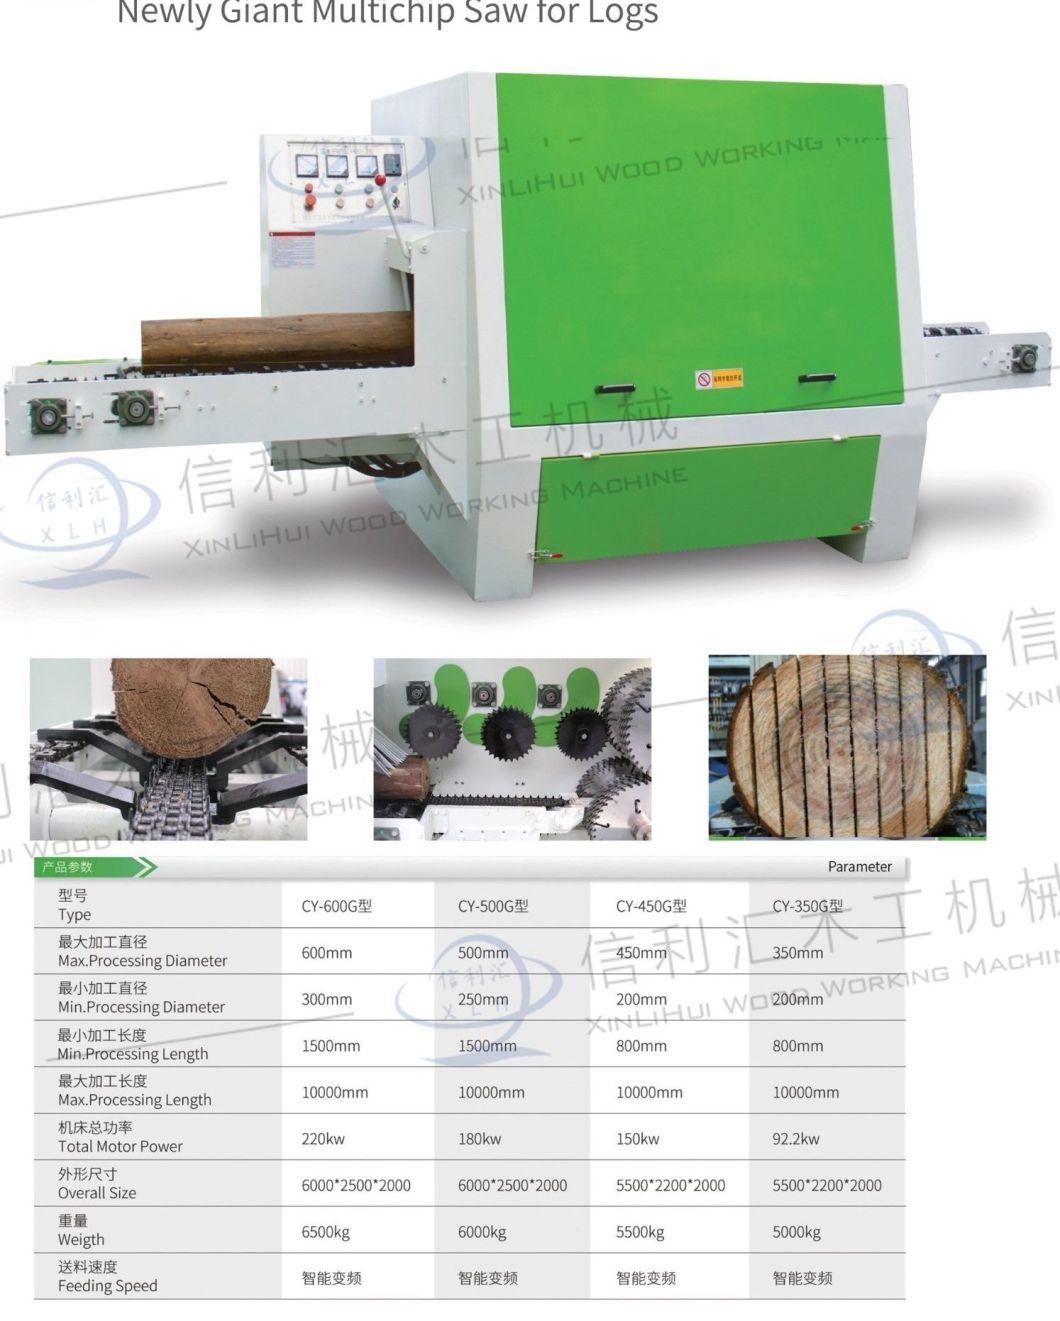 Woodworking Machinery and Equipment, Woodworking Multi-Blade Saws, Cooling Multi-Blade Saws in The Upper and Lower Shafts, Automatic Speed-Regulating Log Saw